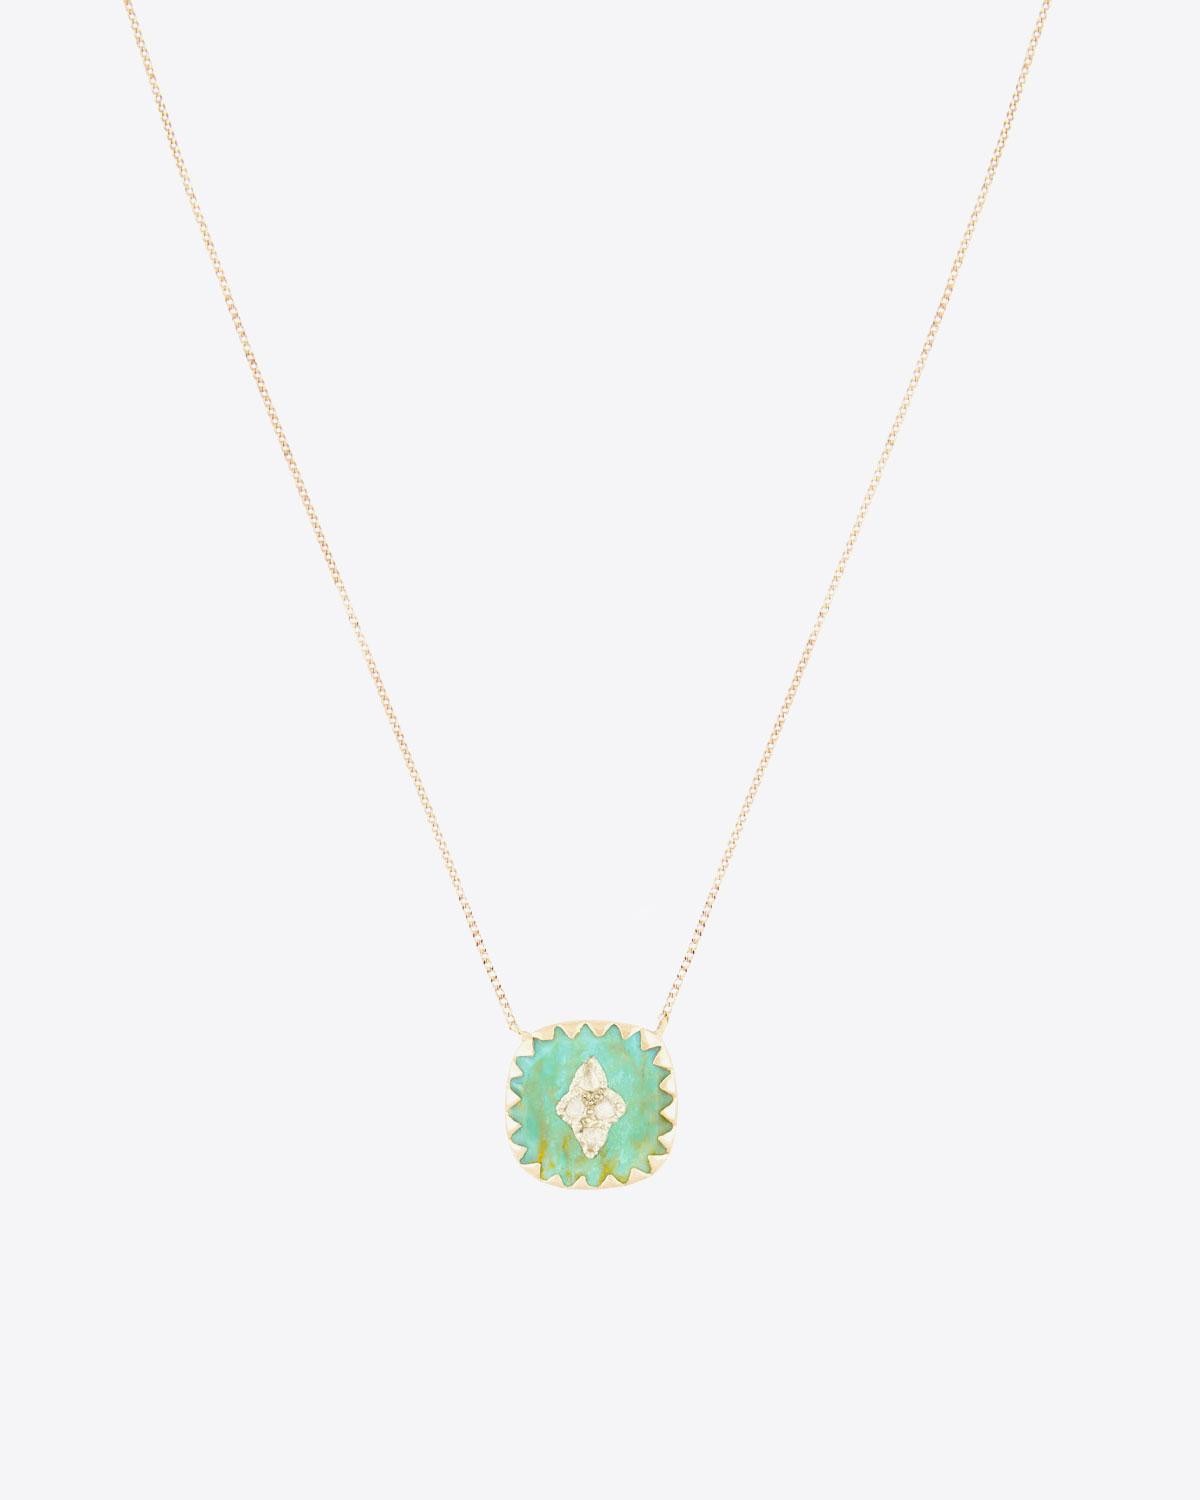 Pascale Monvoisin Pierrot N°2 Collier Turquoise   